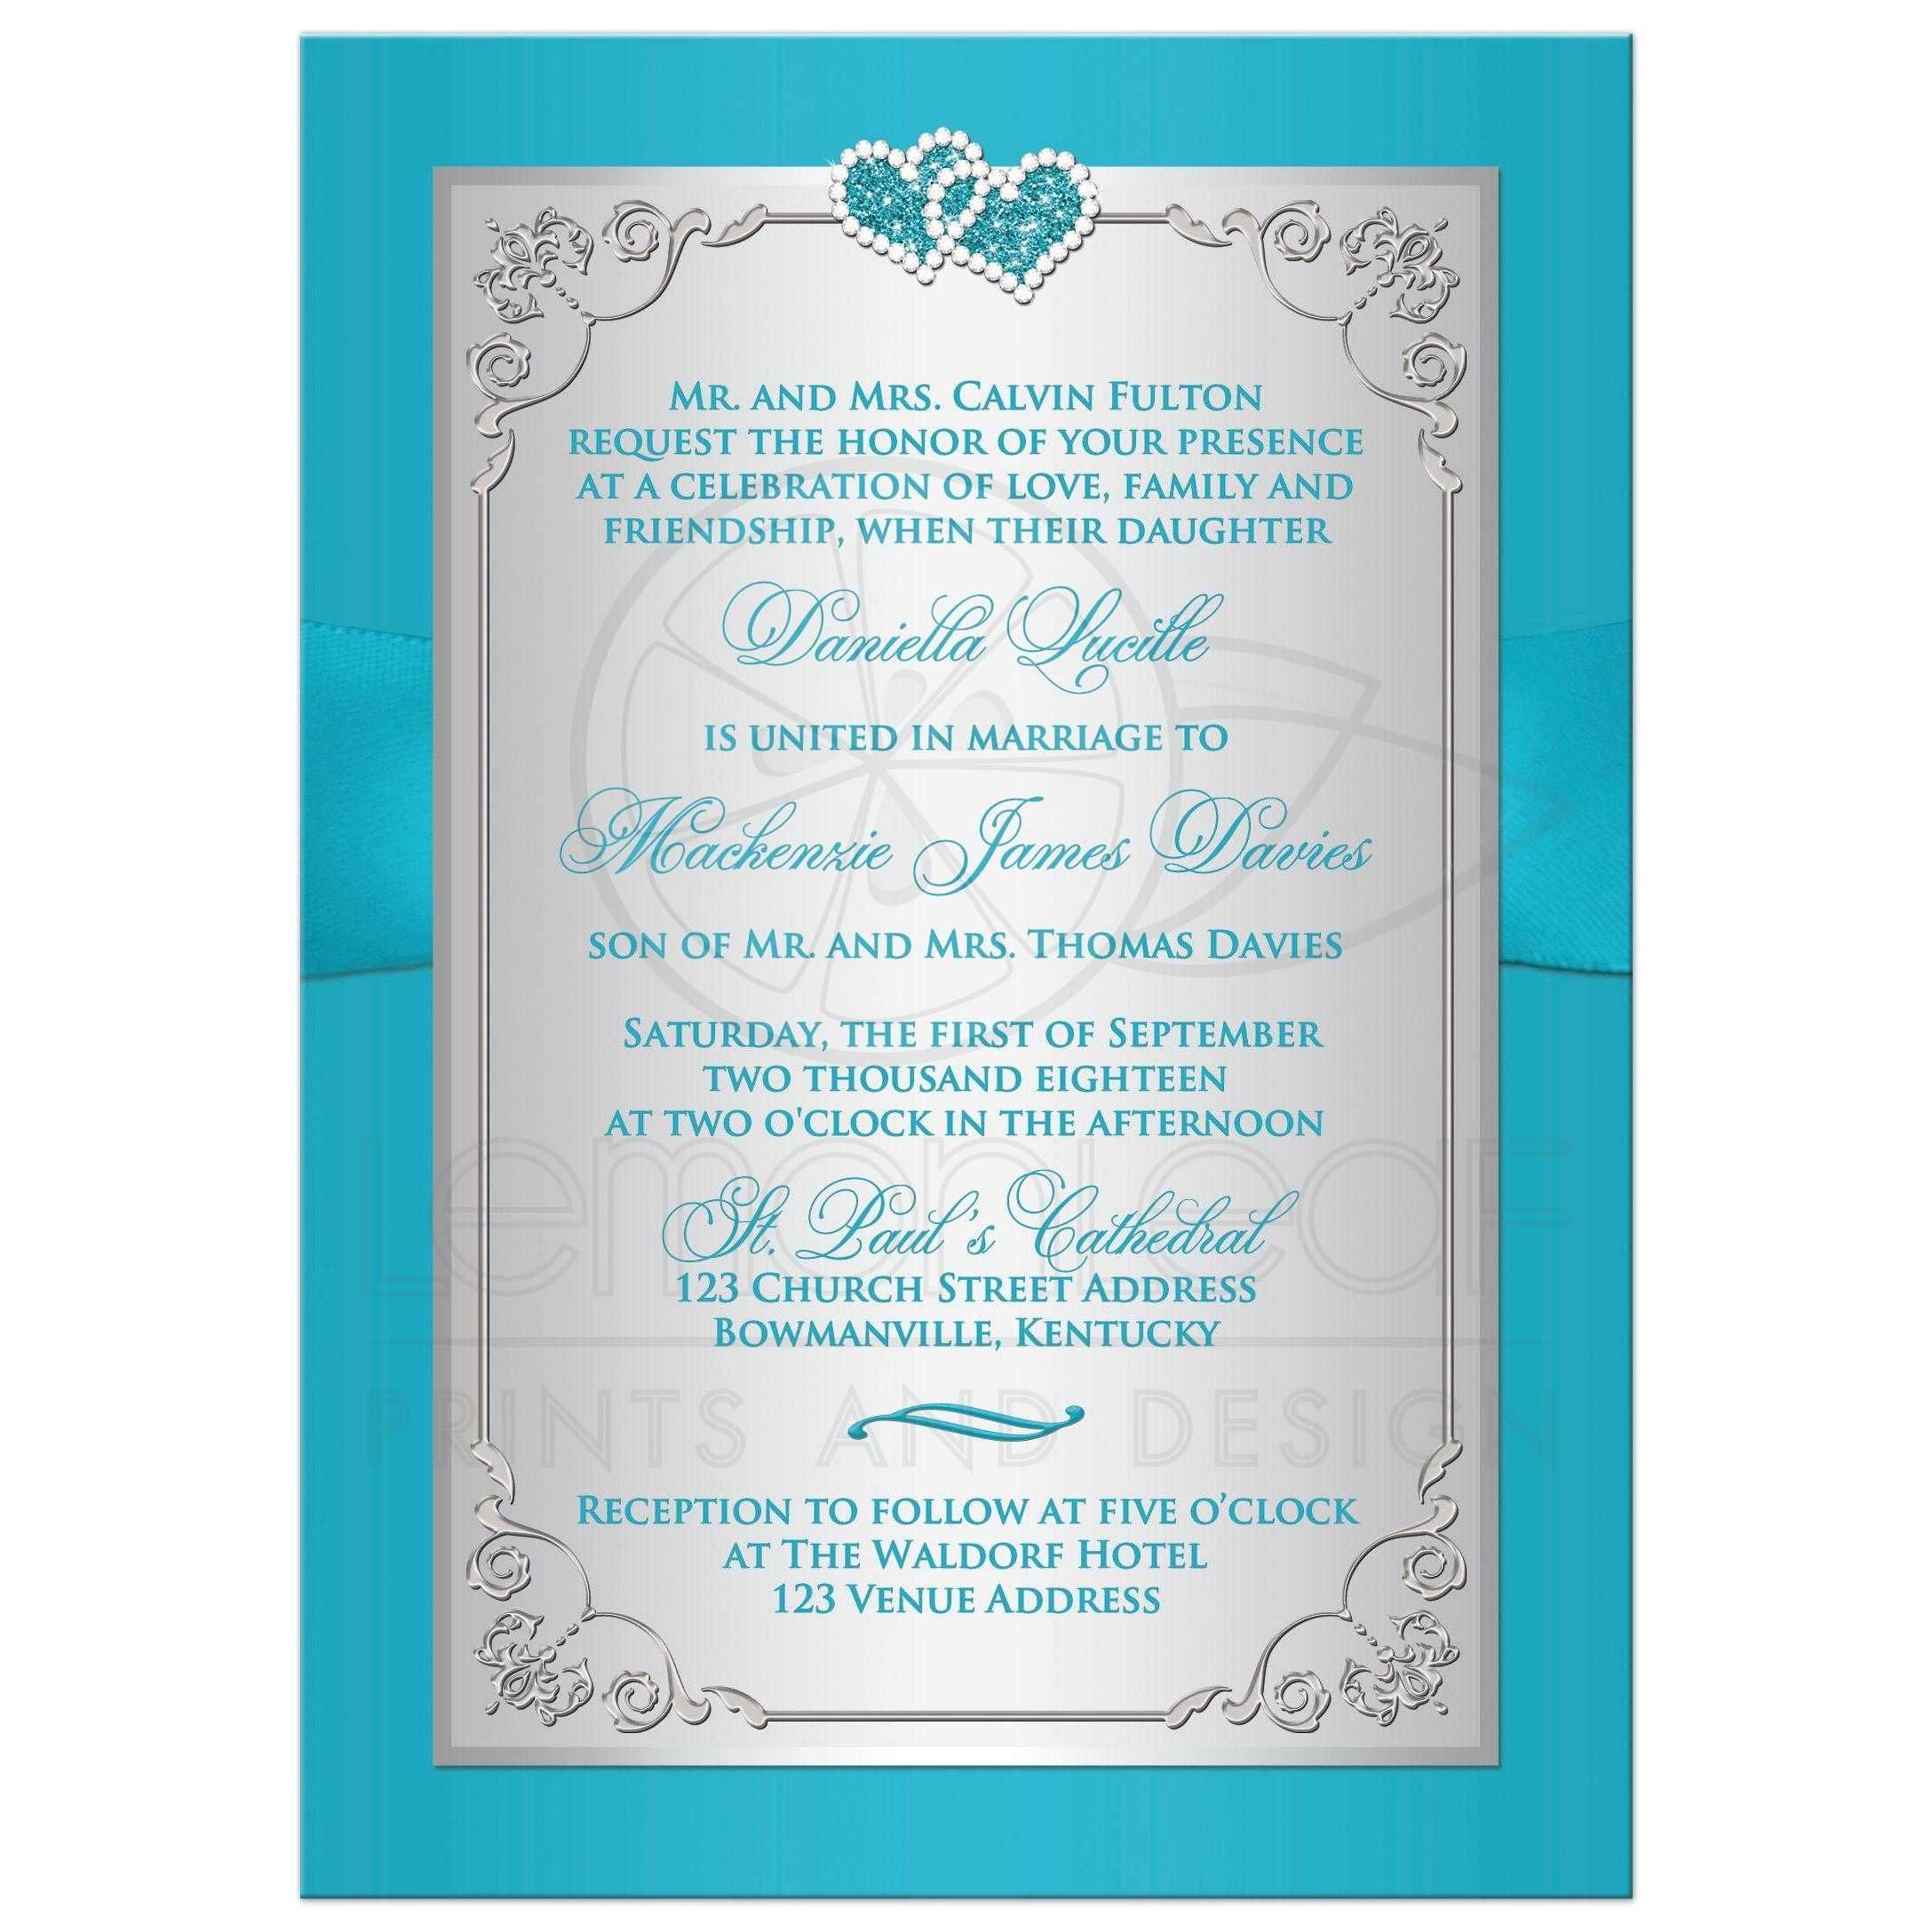 wedding invitation turquoise silver floral printed ribbon joined jeweled hearts